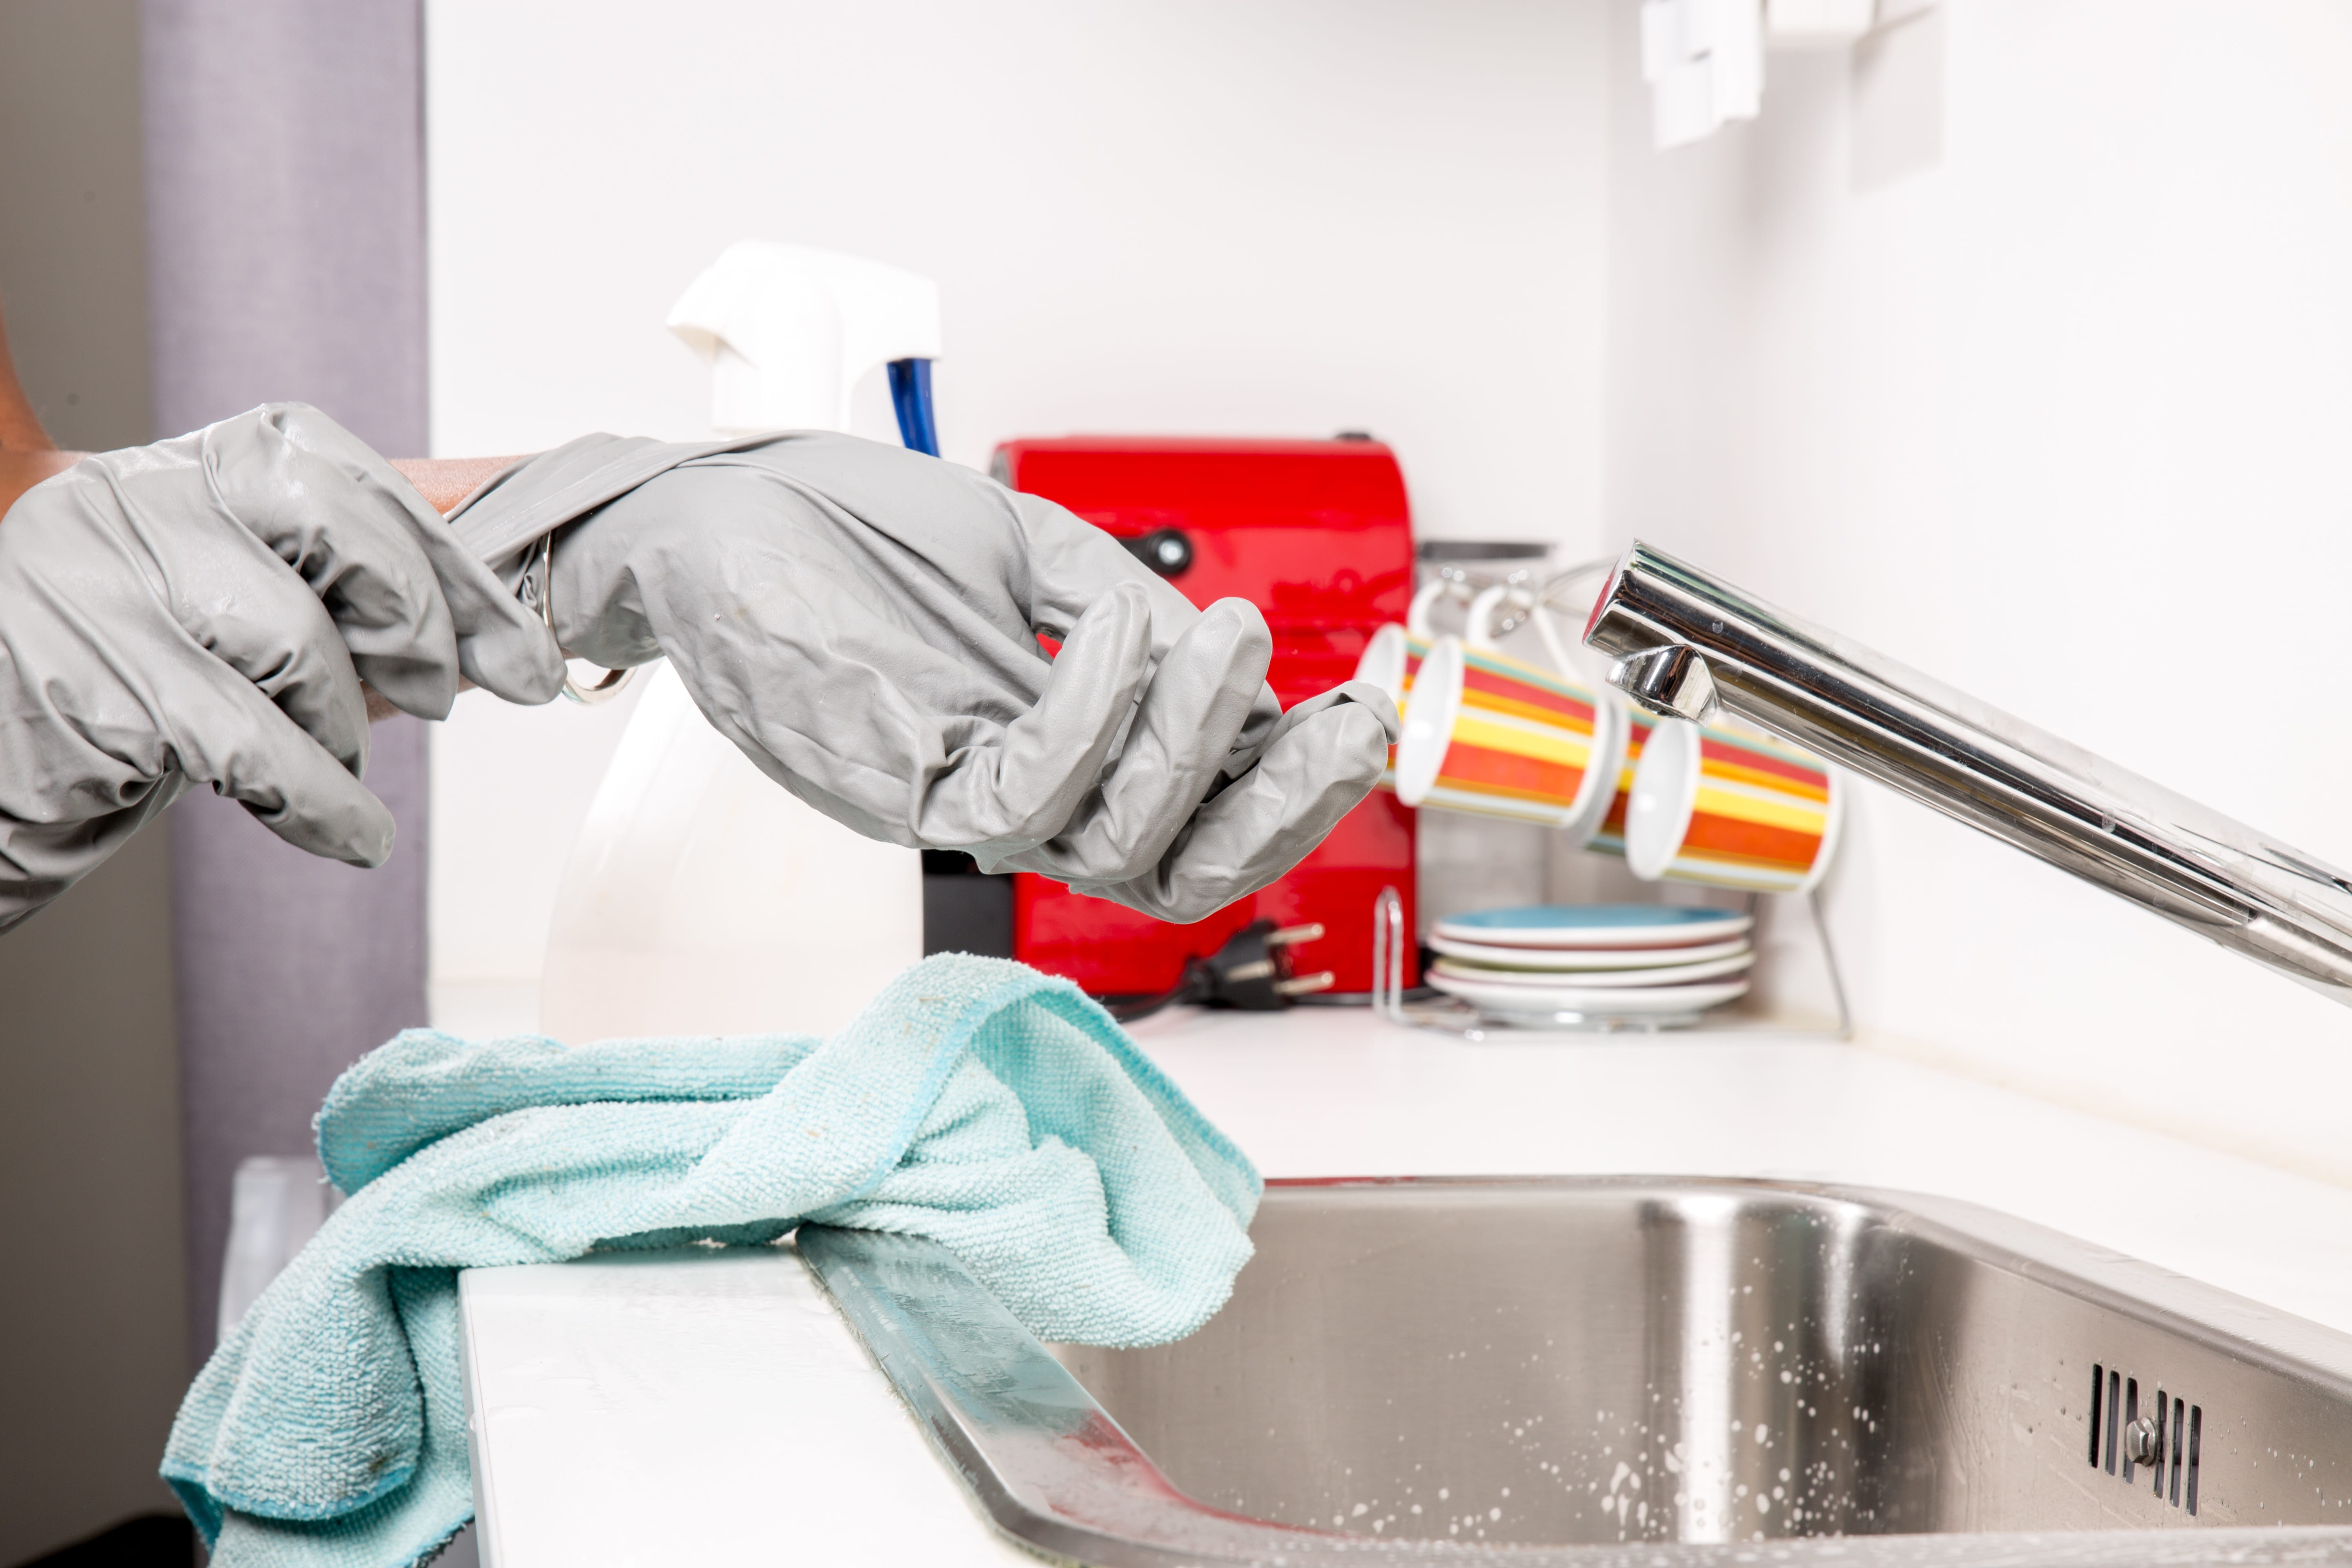 person wearing gloves near stainless steel faucet, cleanliness